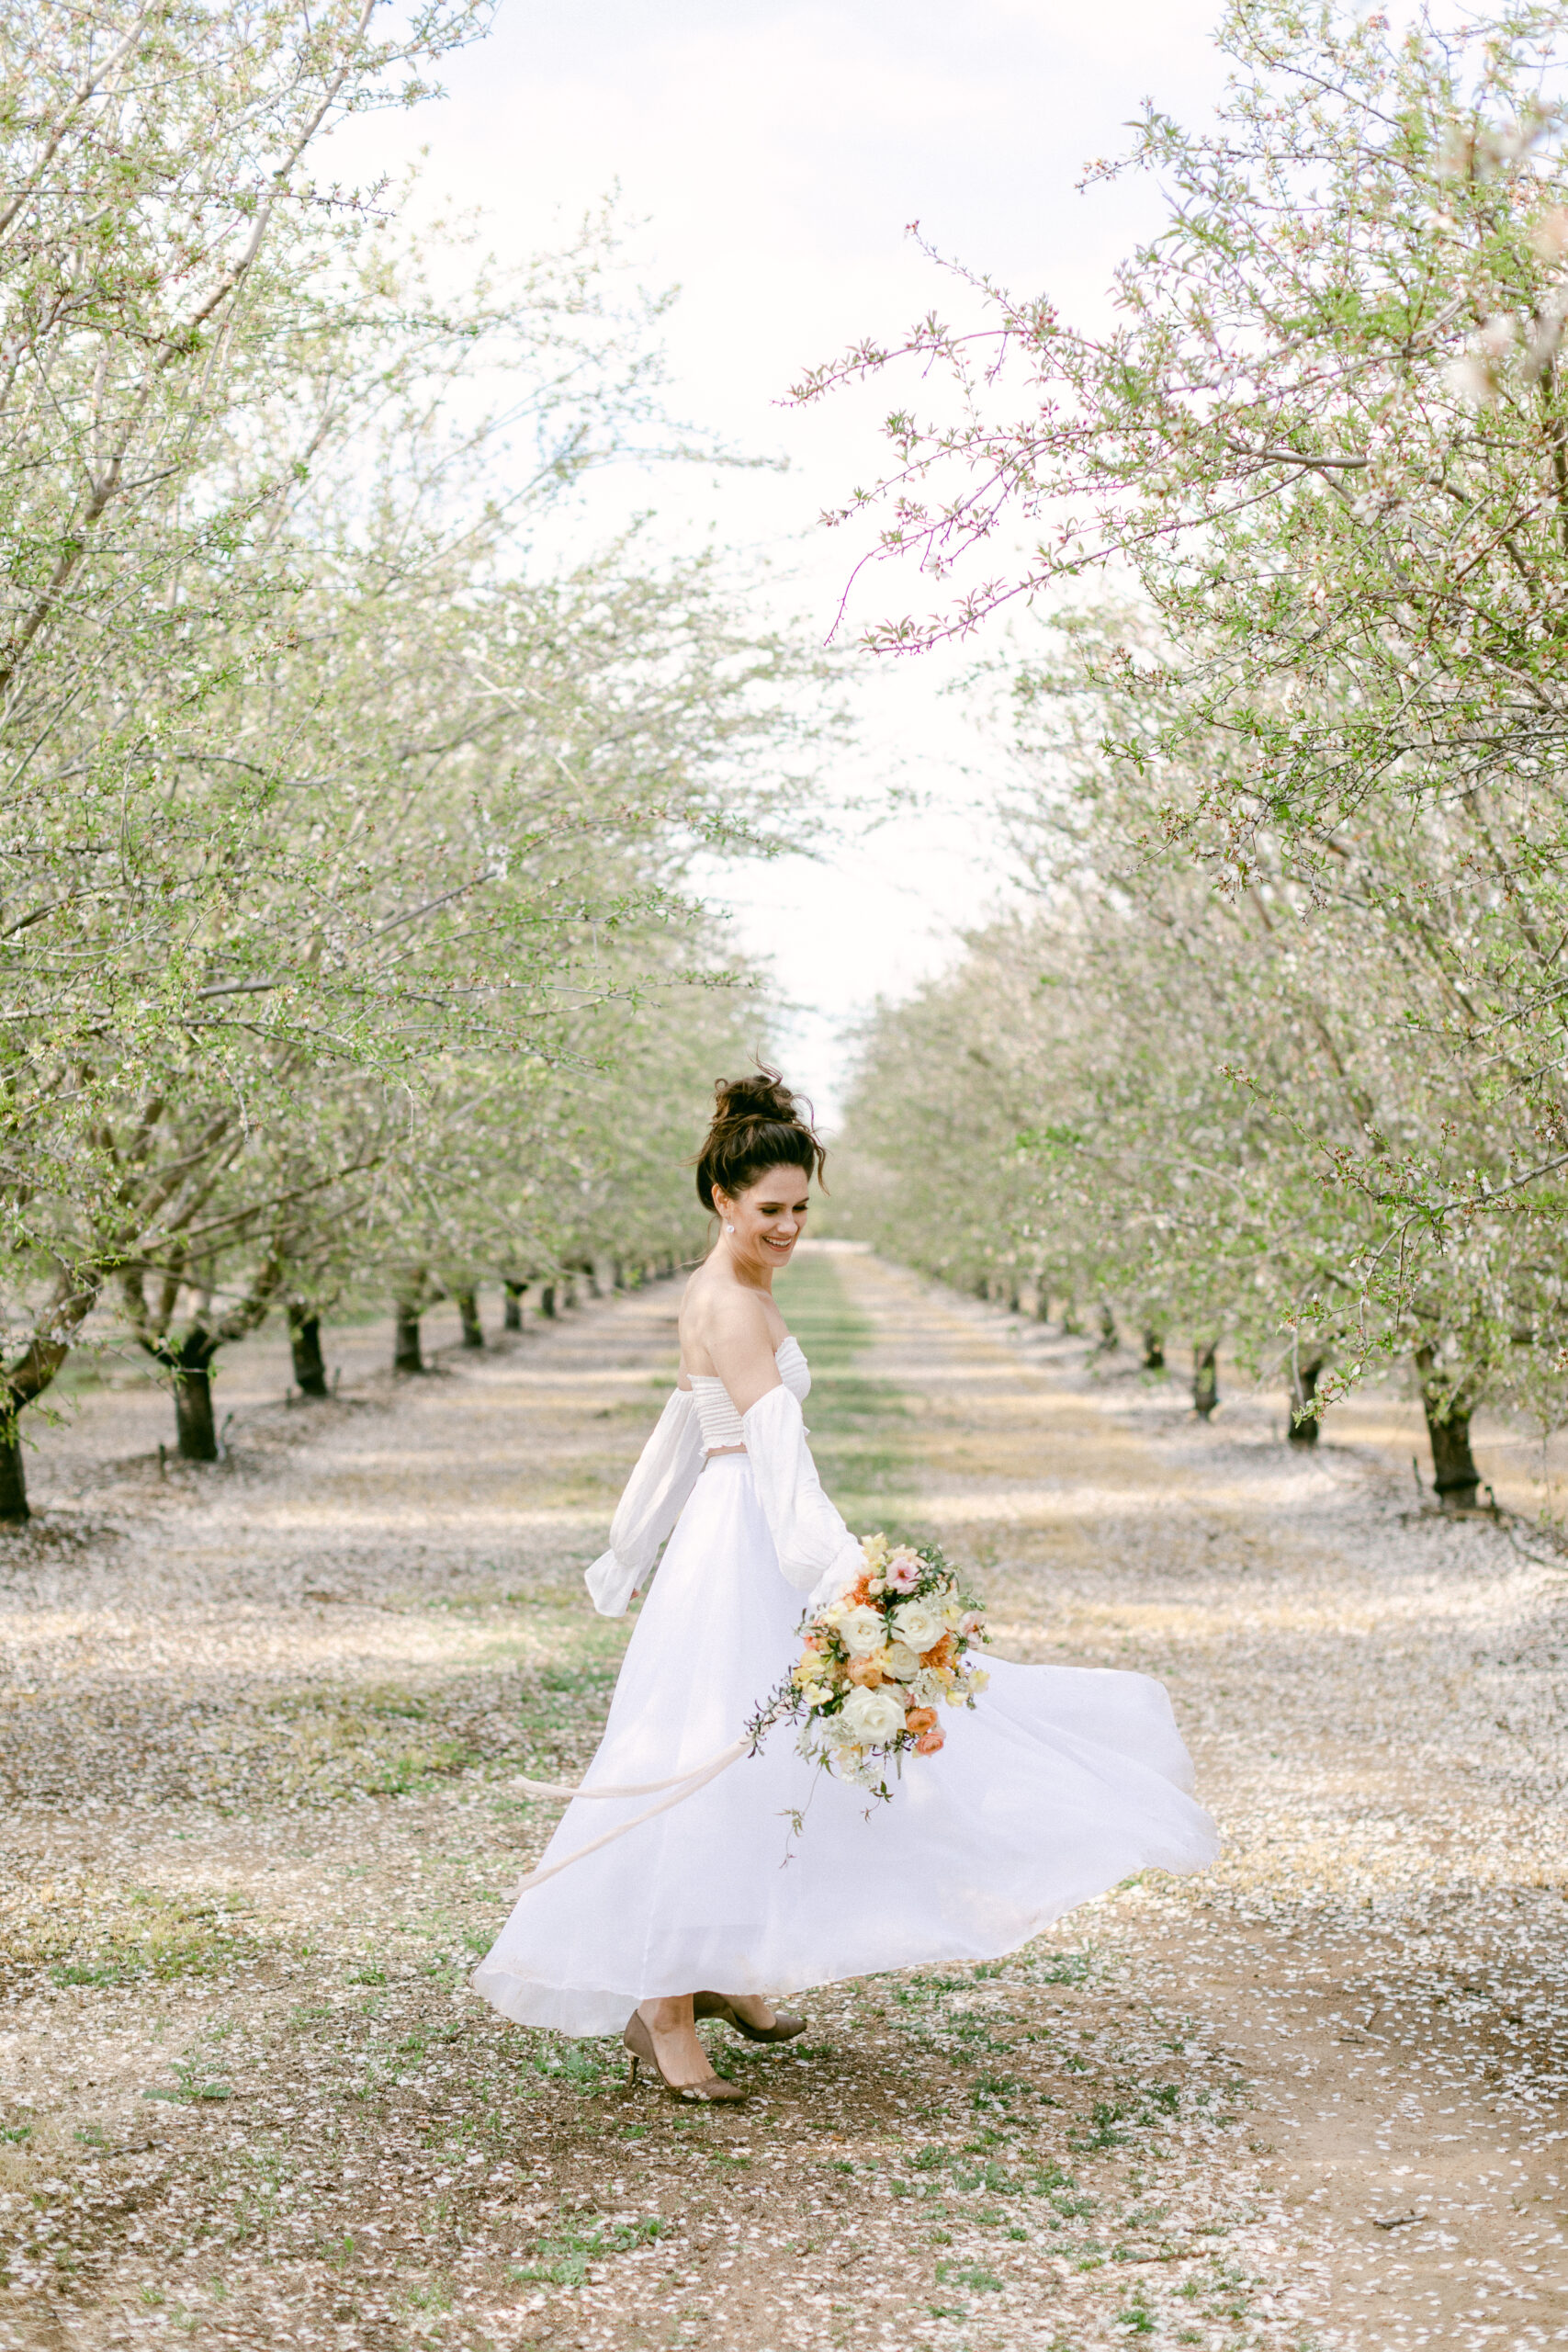 Bride twirling in almond blossom orchard while holding bouquet